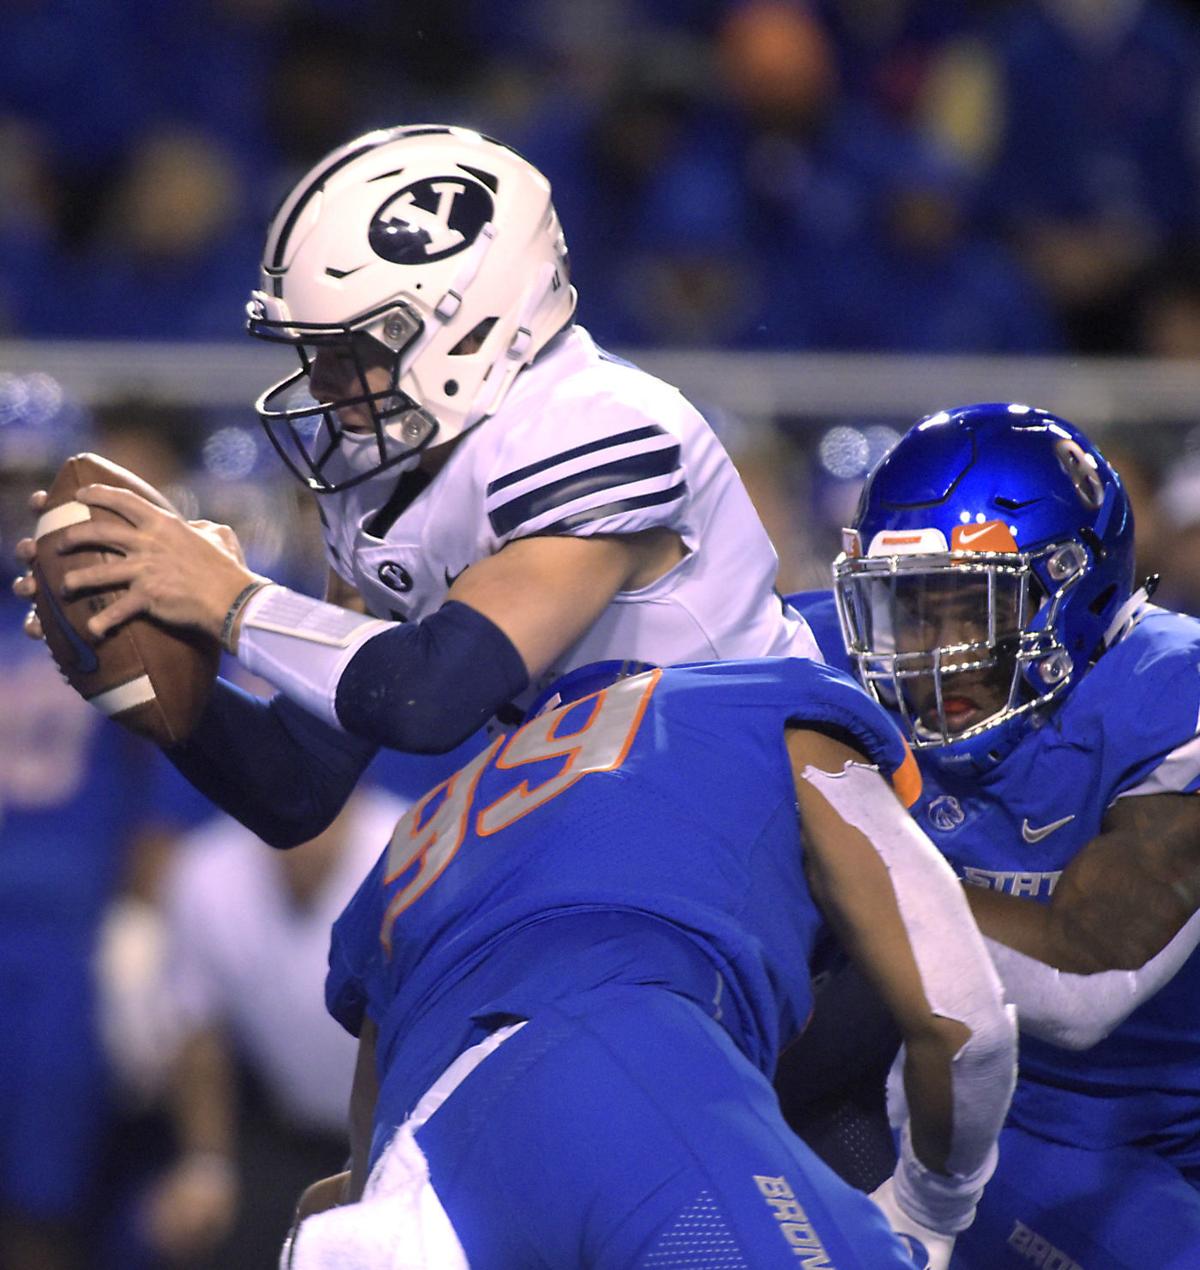 Boise State defense flexes its muscles against BYU | Boise ...